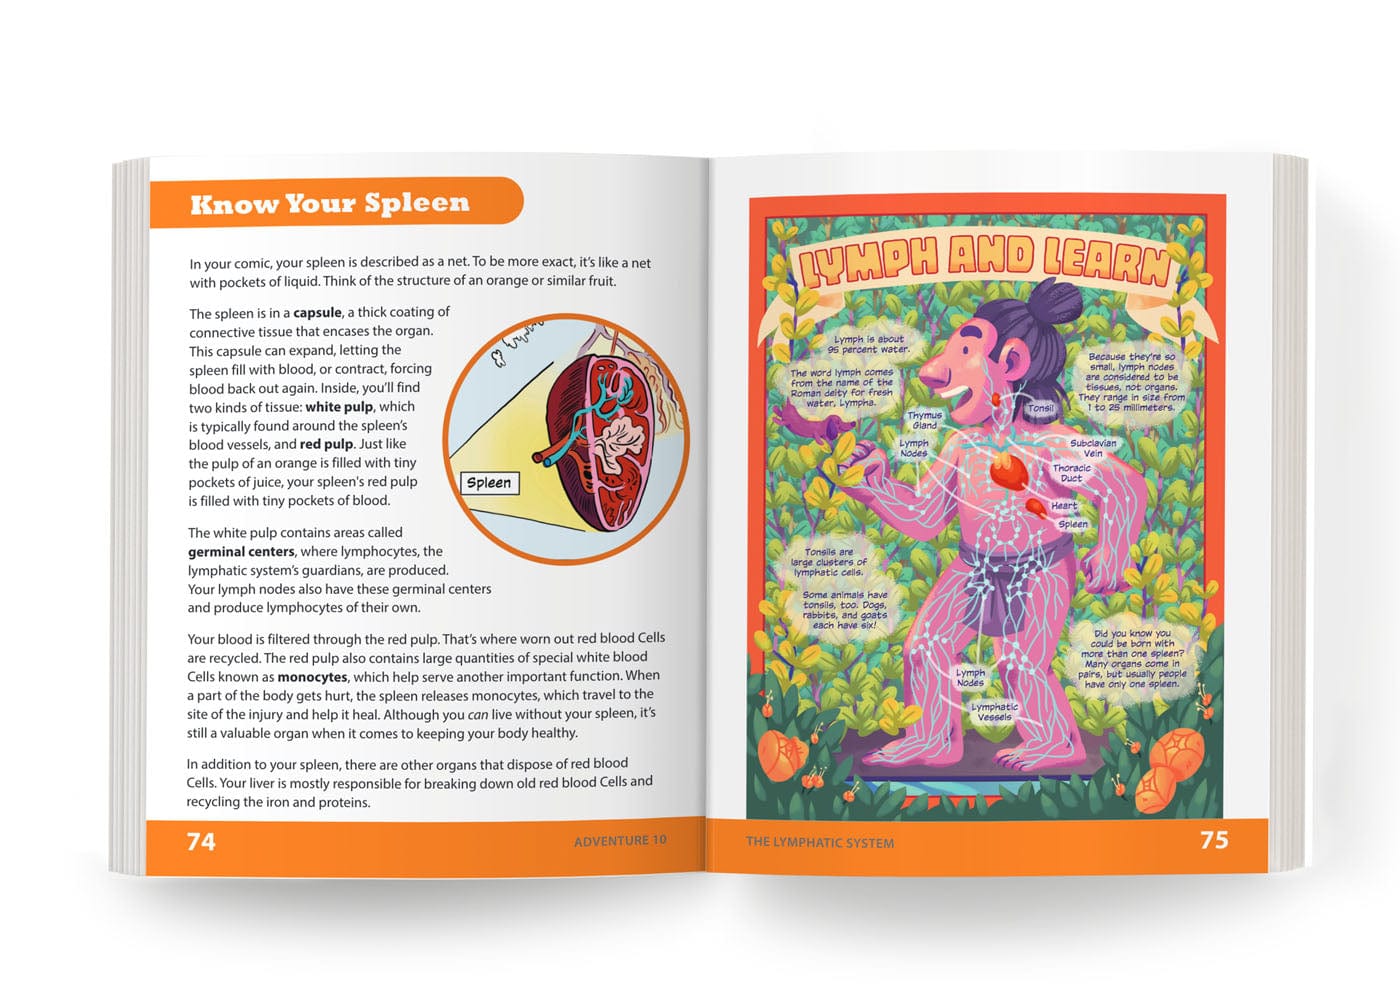 The Lymphatic System: Adventure 10 Health Education for Children